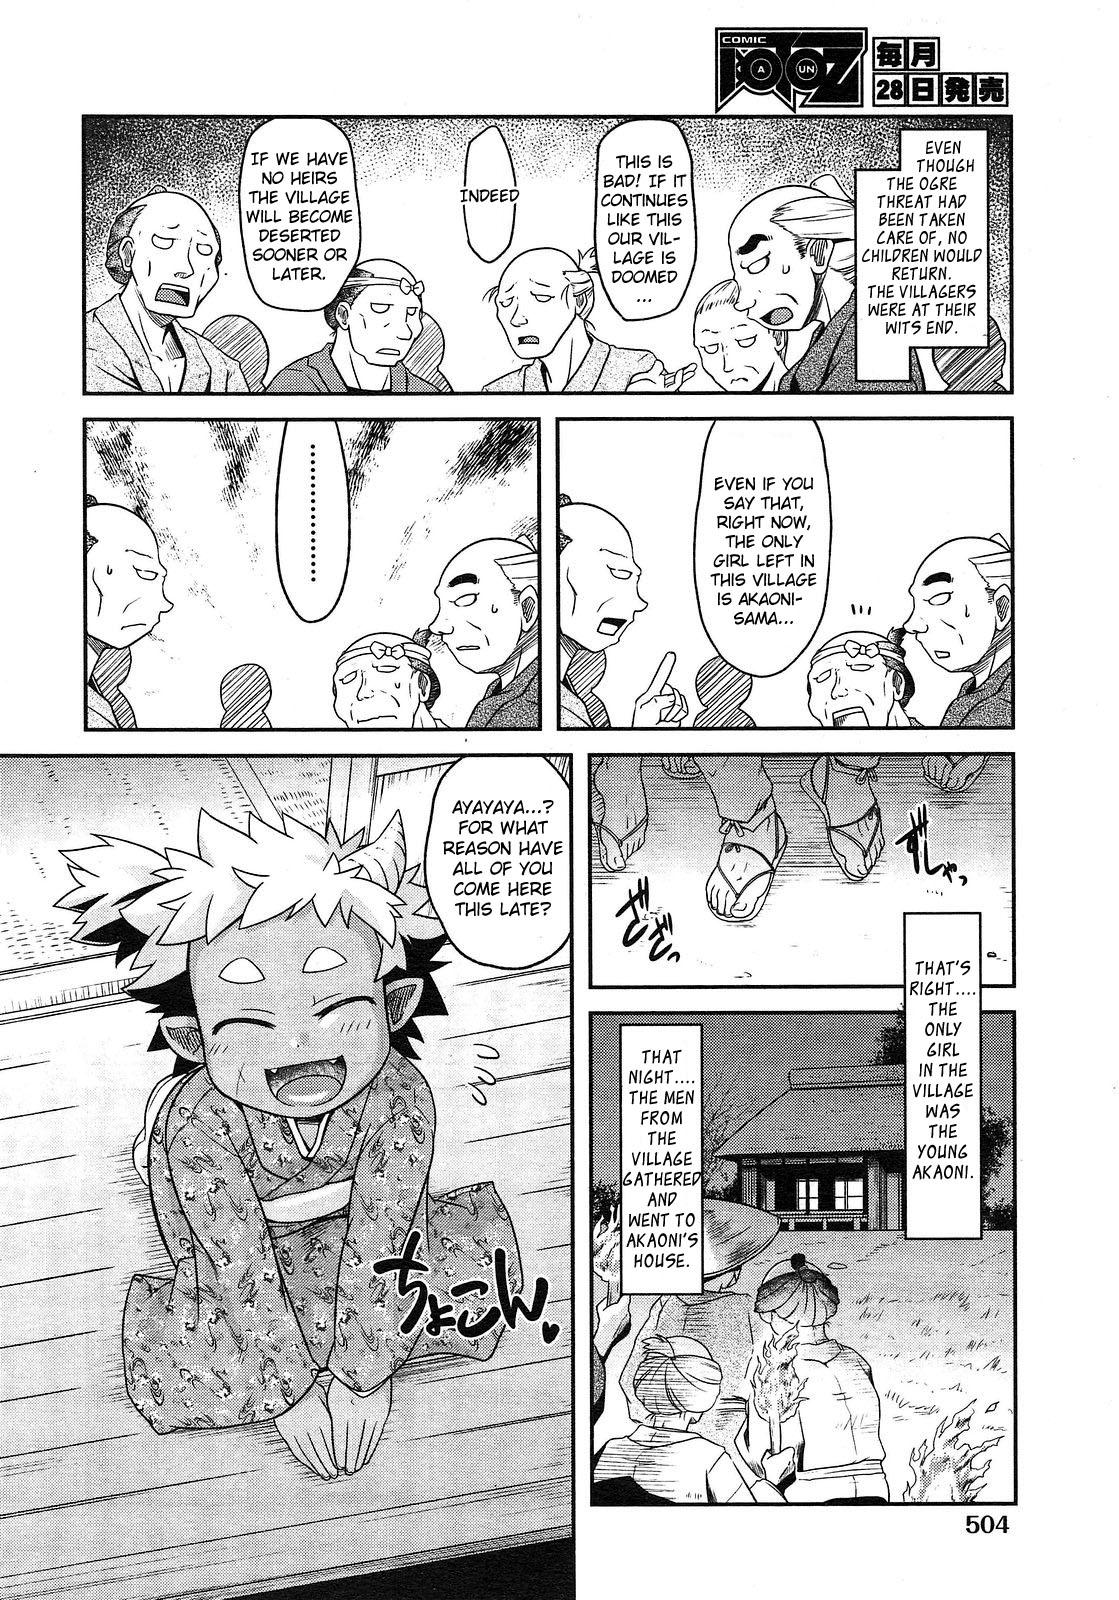 Students Akaoni-don no Tango | Red Ogre's Tango Gay Hairy - Page 6